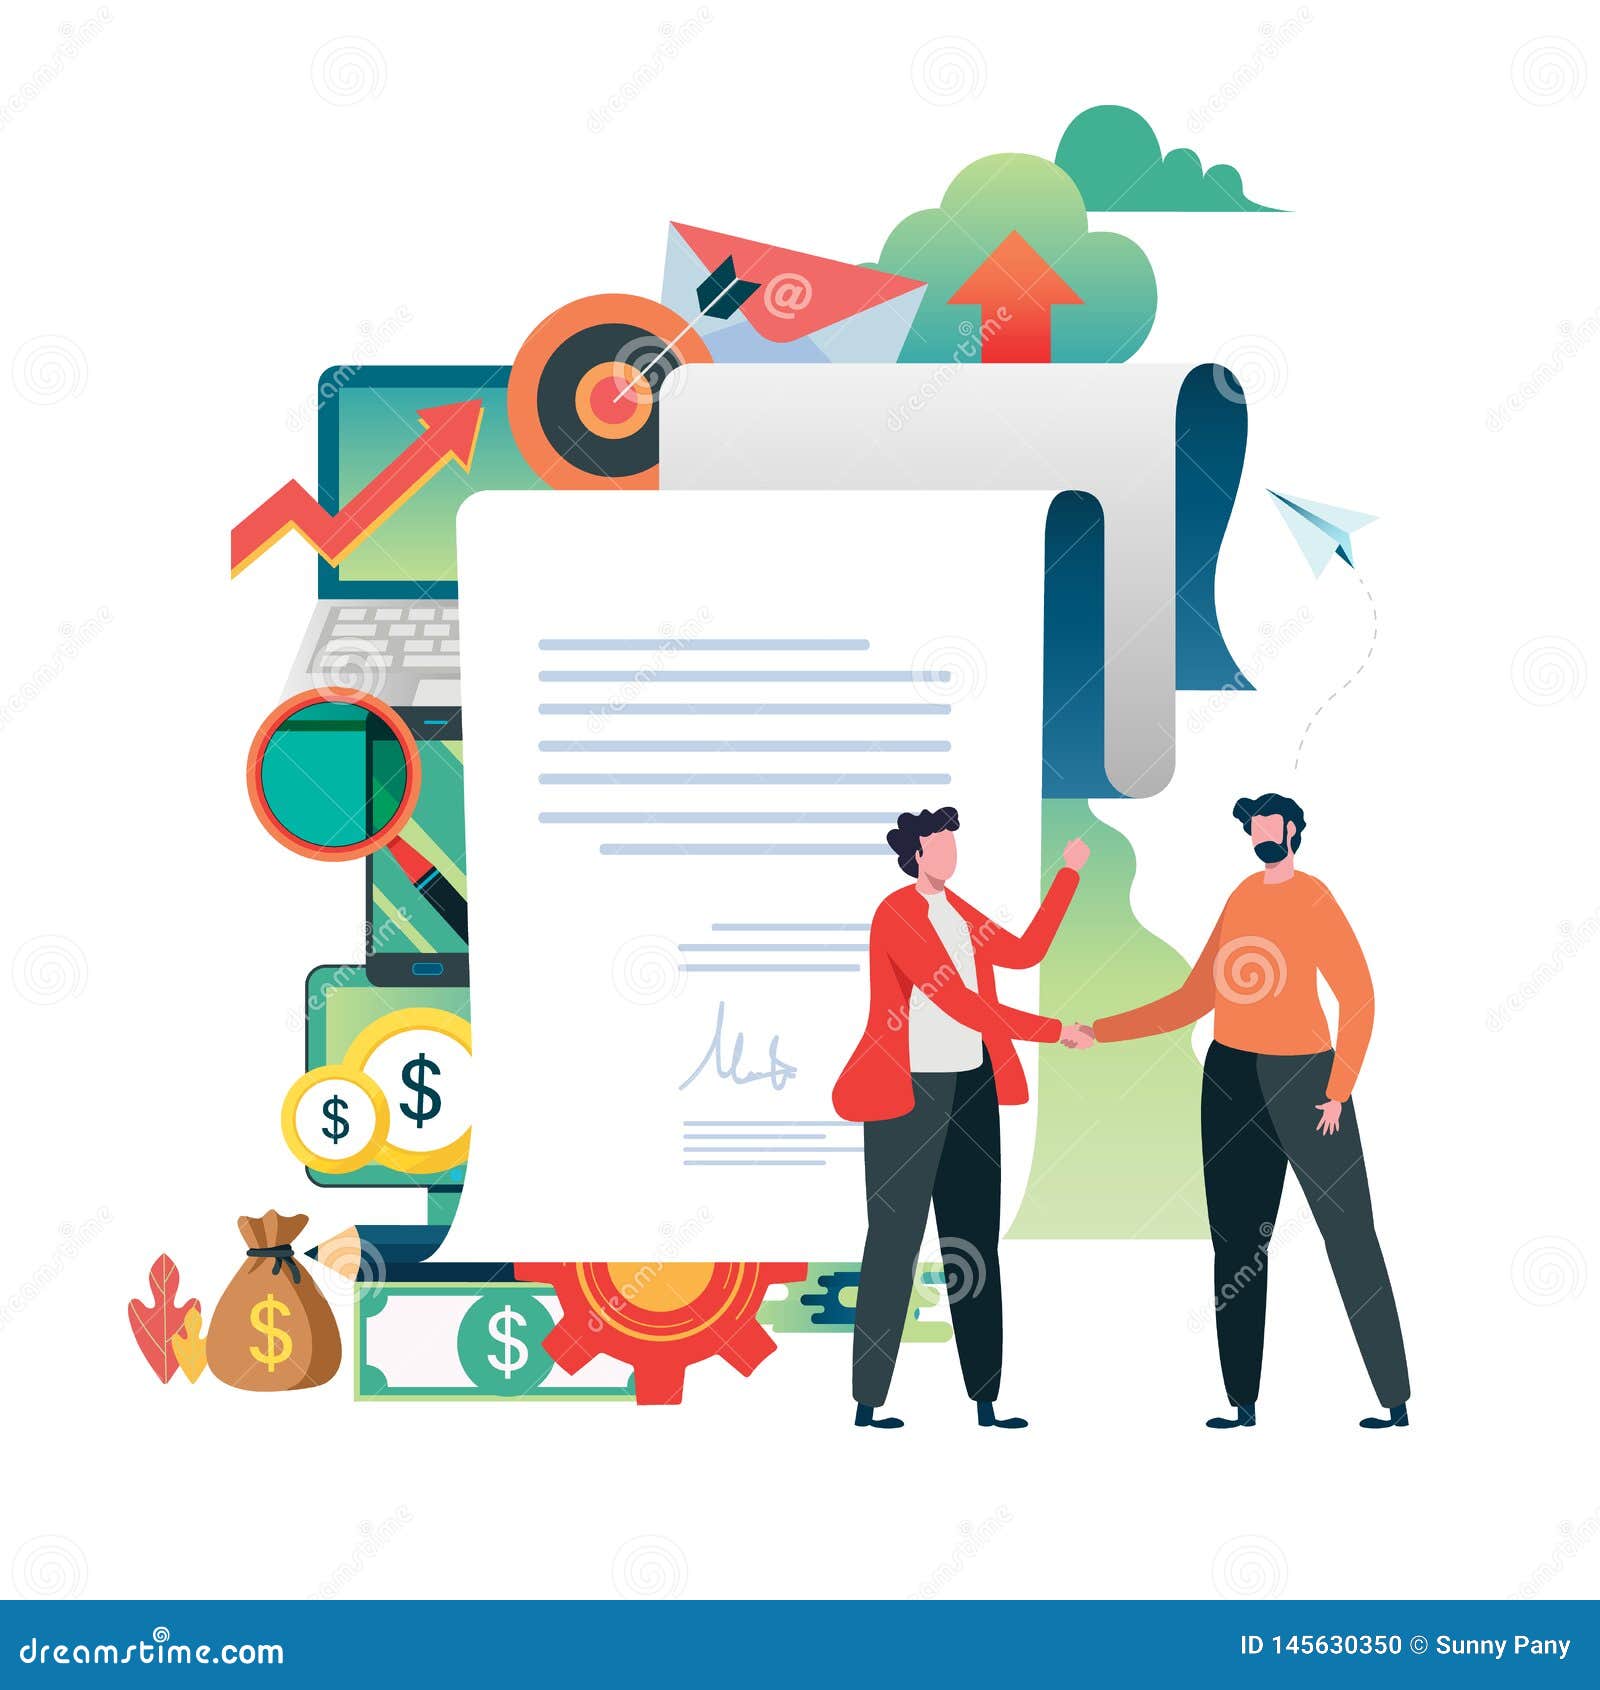 Agreement. Business People Signed Contract. Hand Shake of Business.  Financial Investments Illustration Stock Illustration - Illustration of  infographic, flat: 145630350